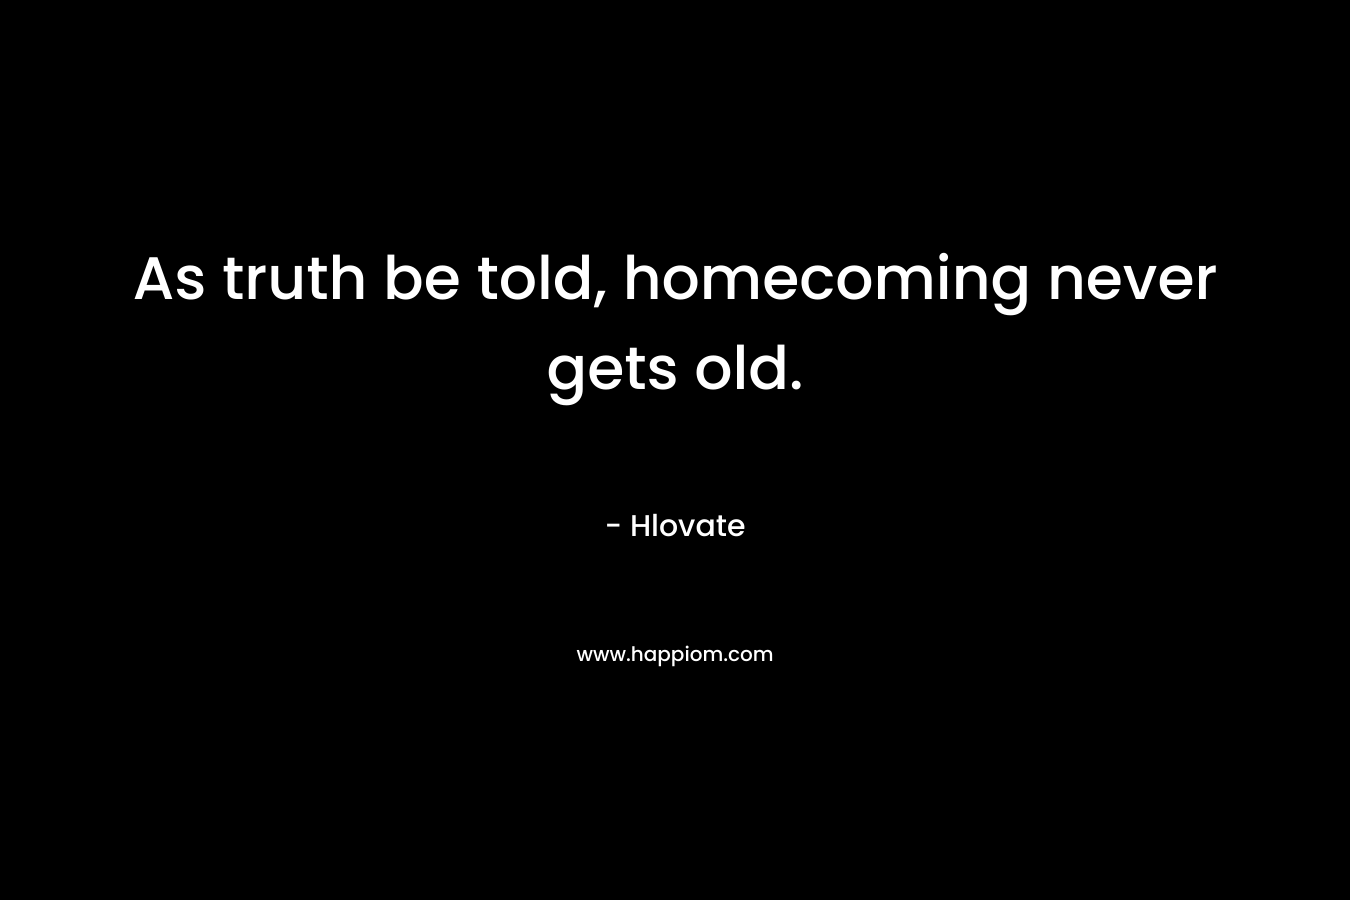 As truth be told, homecoming never gets old. – Hlovate